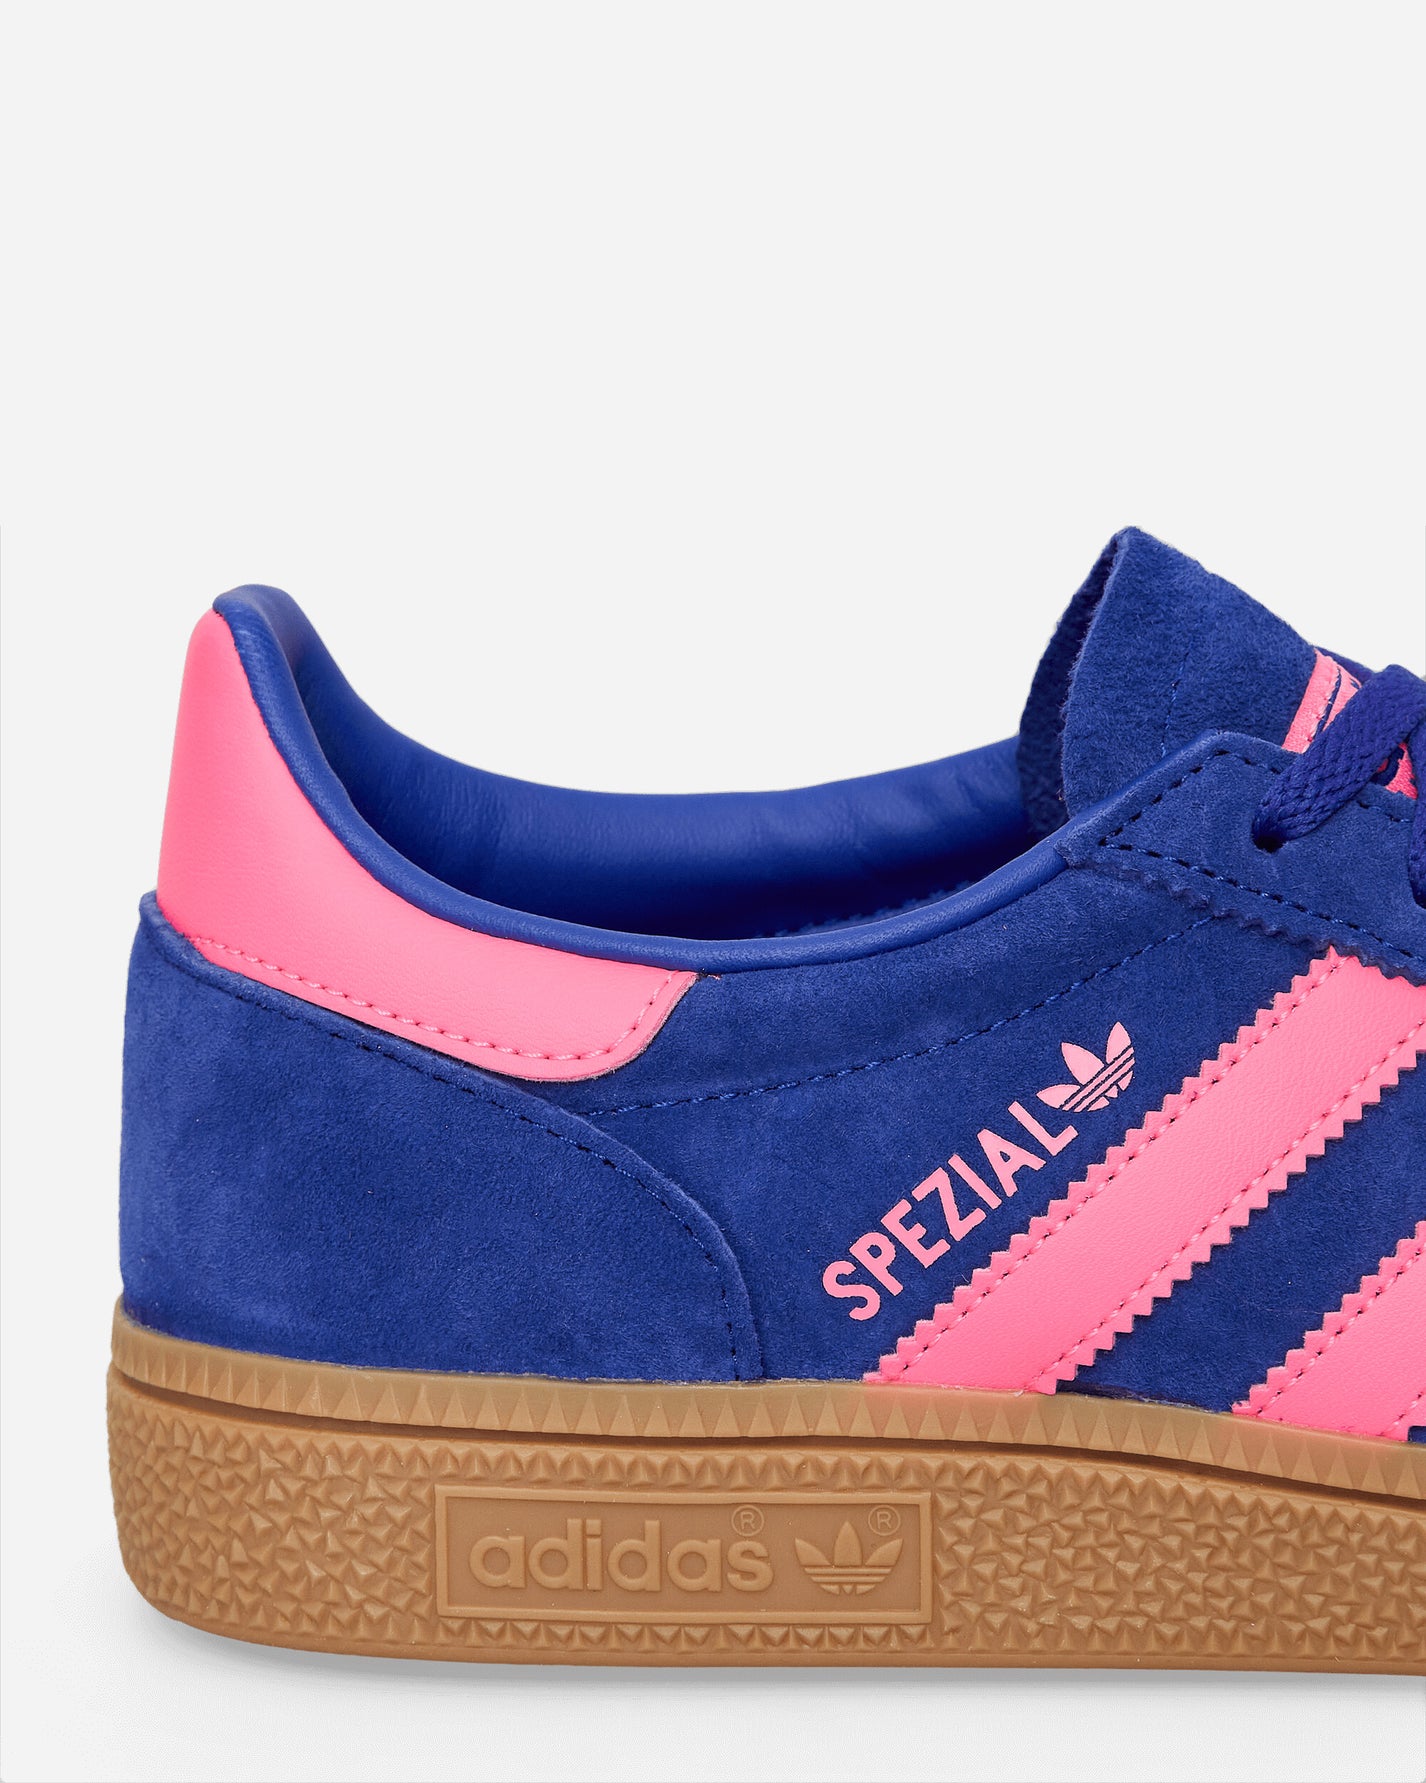 adidas Wmns Handball Spezial W Lucid Blue/Lucid Pink Sneakers Low IH5373